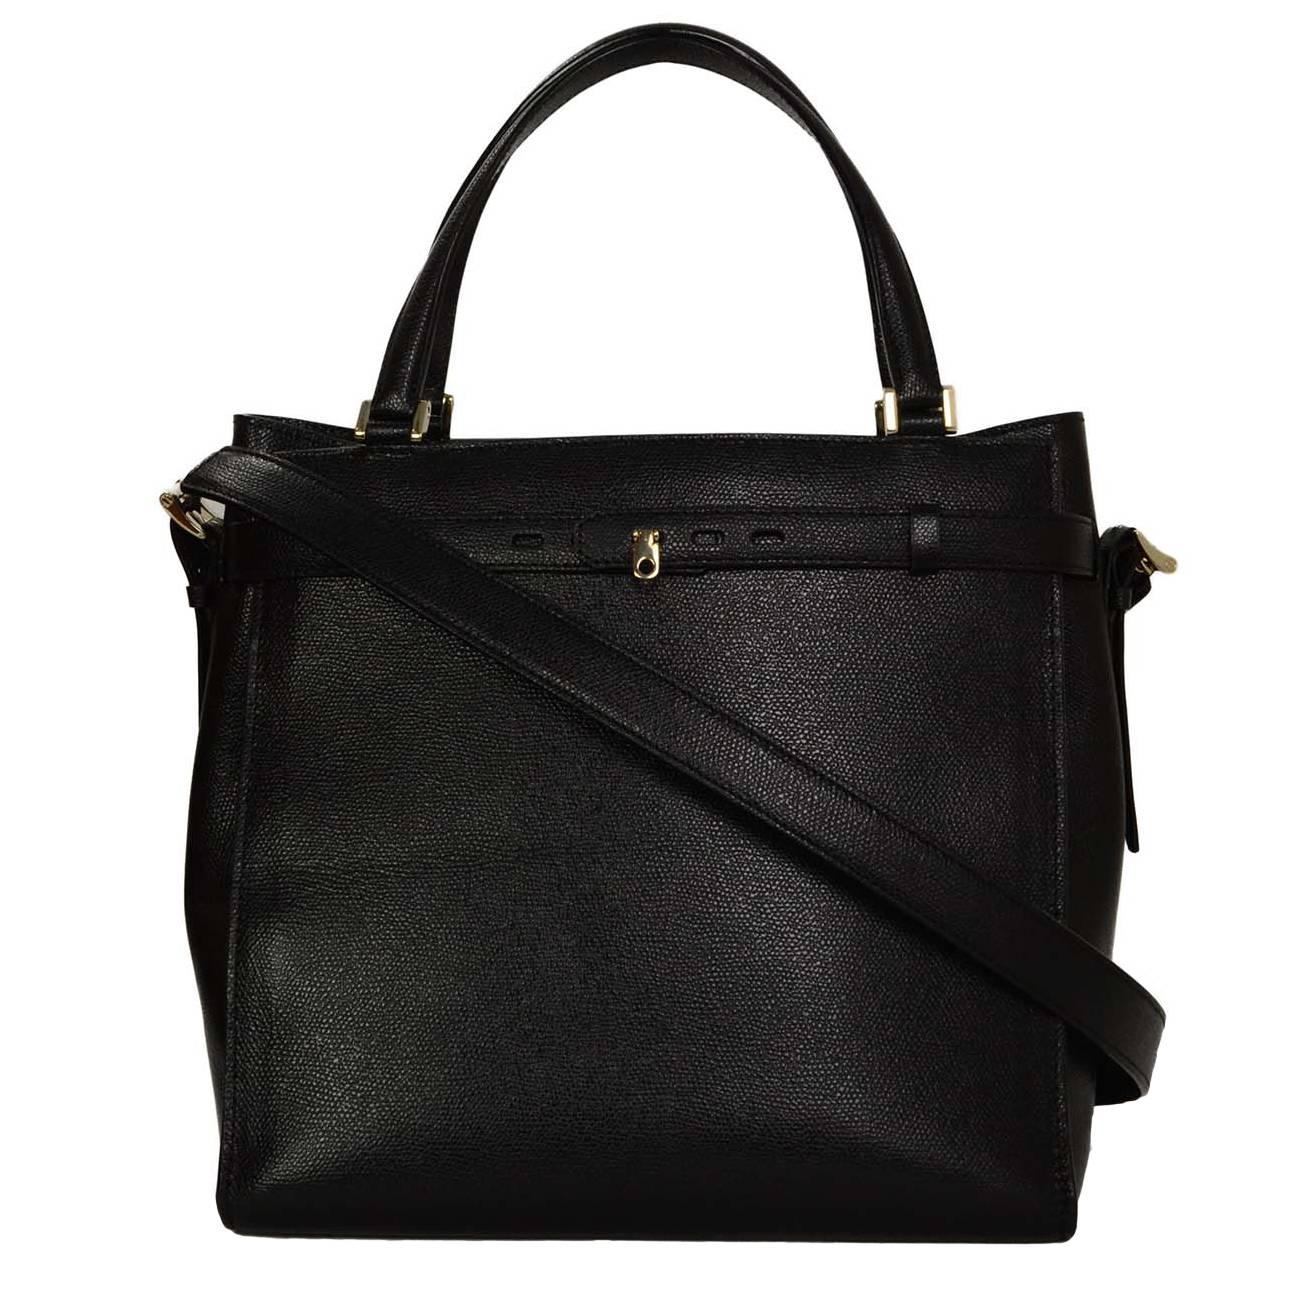 Valextra Black Textured Leather Large B-Cube Tote Bag SHW  rt. $3, 700